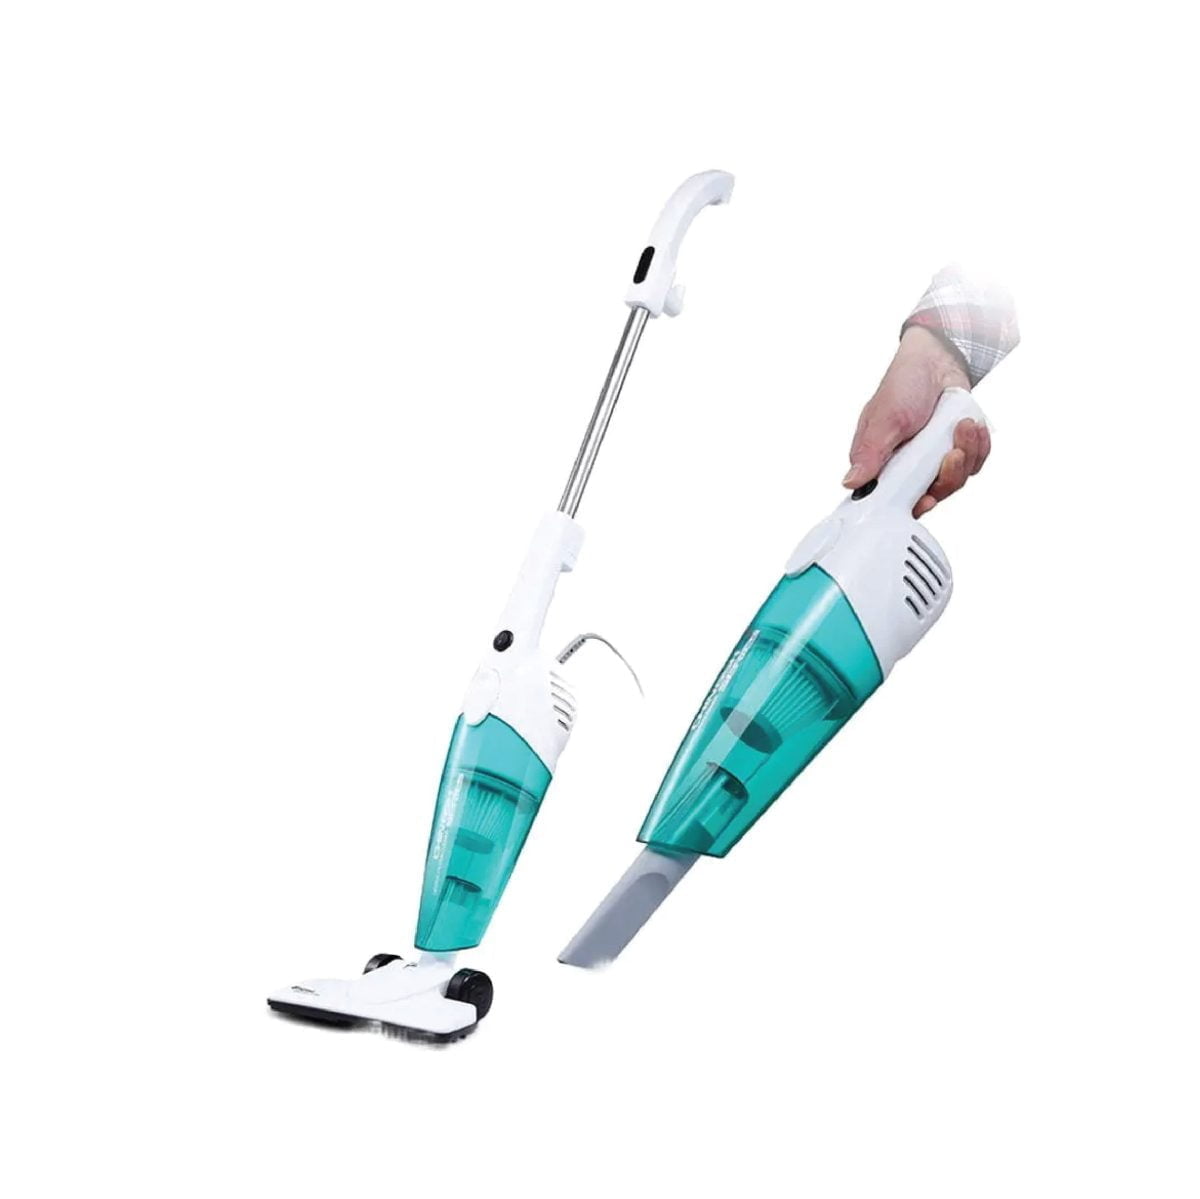 Wtf235 03 Xiaomi Deerma Dx118C Upright Vacuum Cleaner Mini 2-In-1 Pushrod Handheld Cleaner With 16000Pa Super Suction- Green Https://Www.youtube.com/Watch?V=A4_Ujrhyw_I Deerma Dx118C Vacuum Cleaner 2-In-1 Pushrod Handheld Cleaner With 16000Pa Super Suction